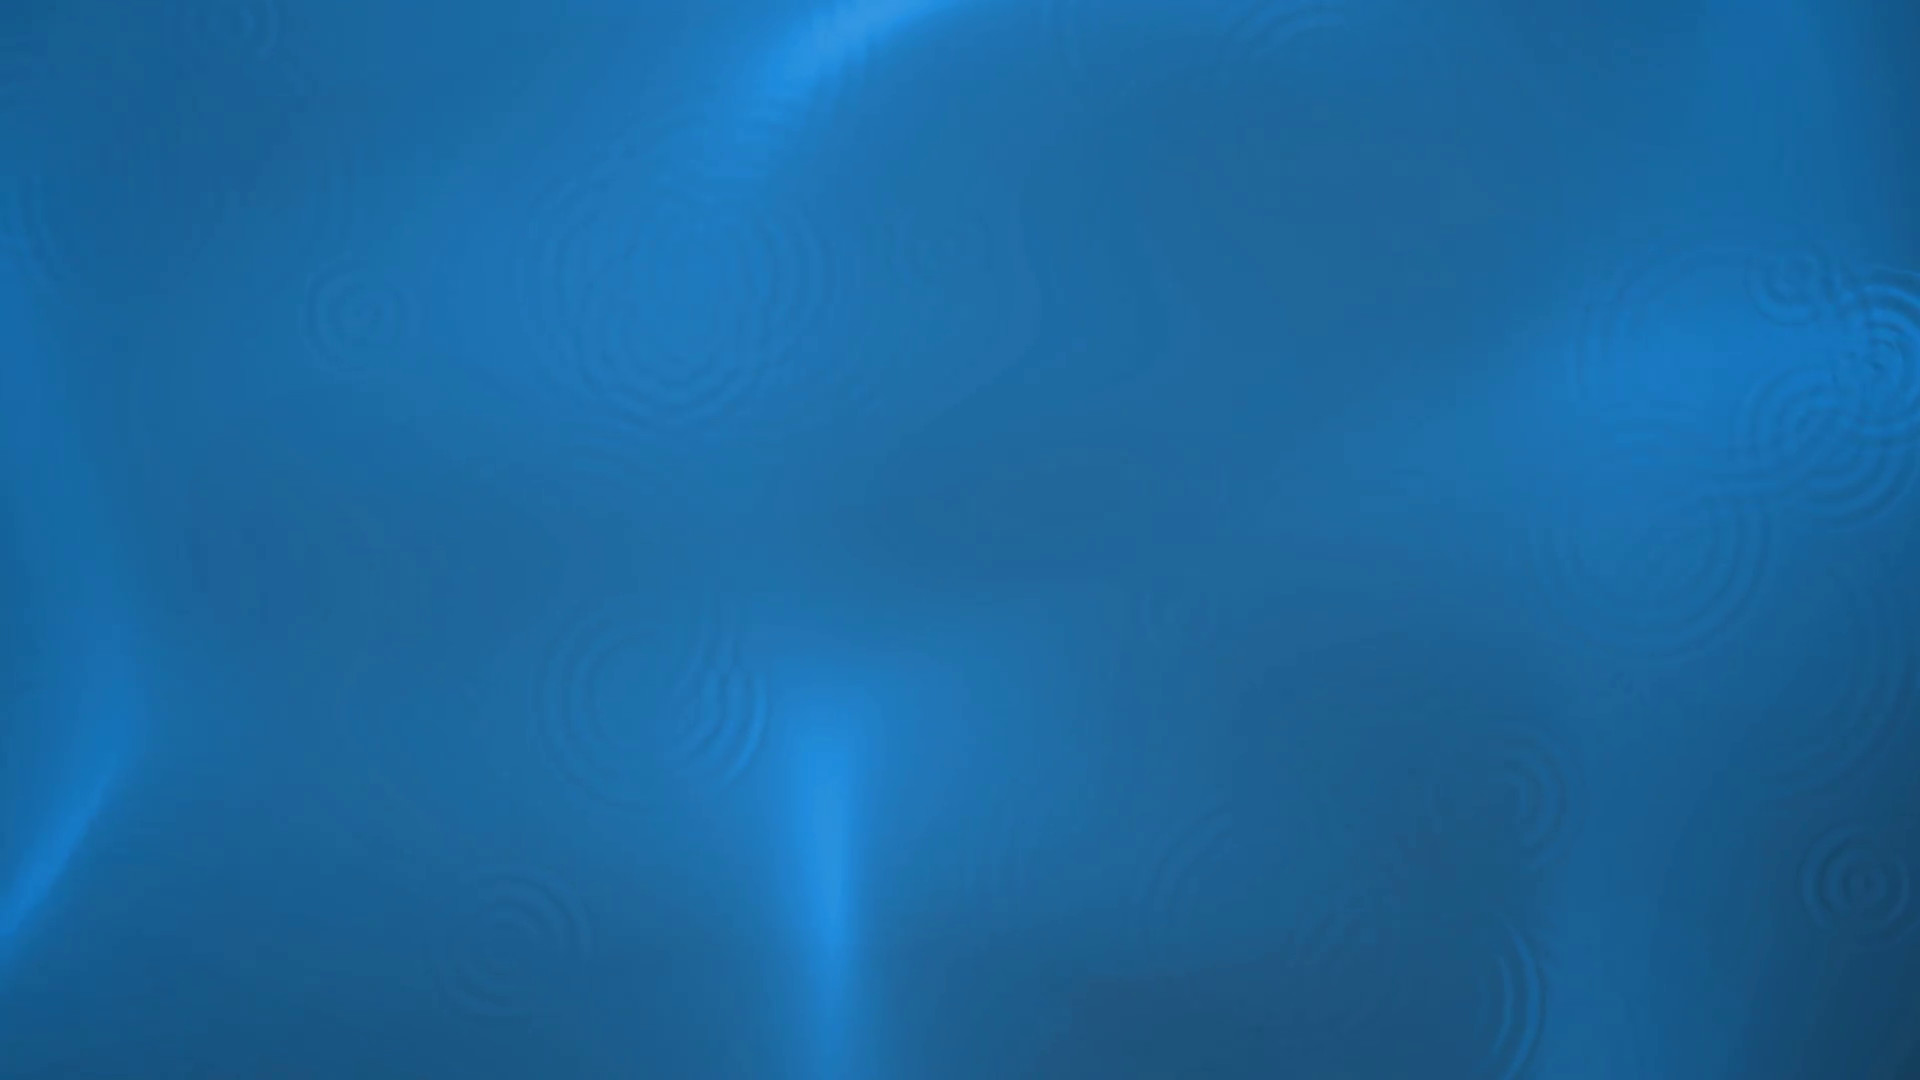 1920x1080 Subscription Library Animated water droplets background